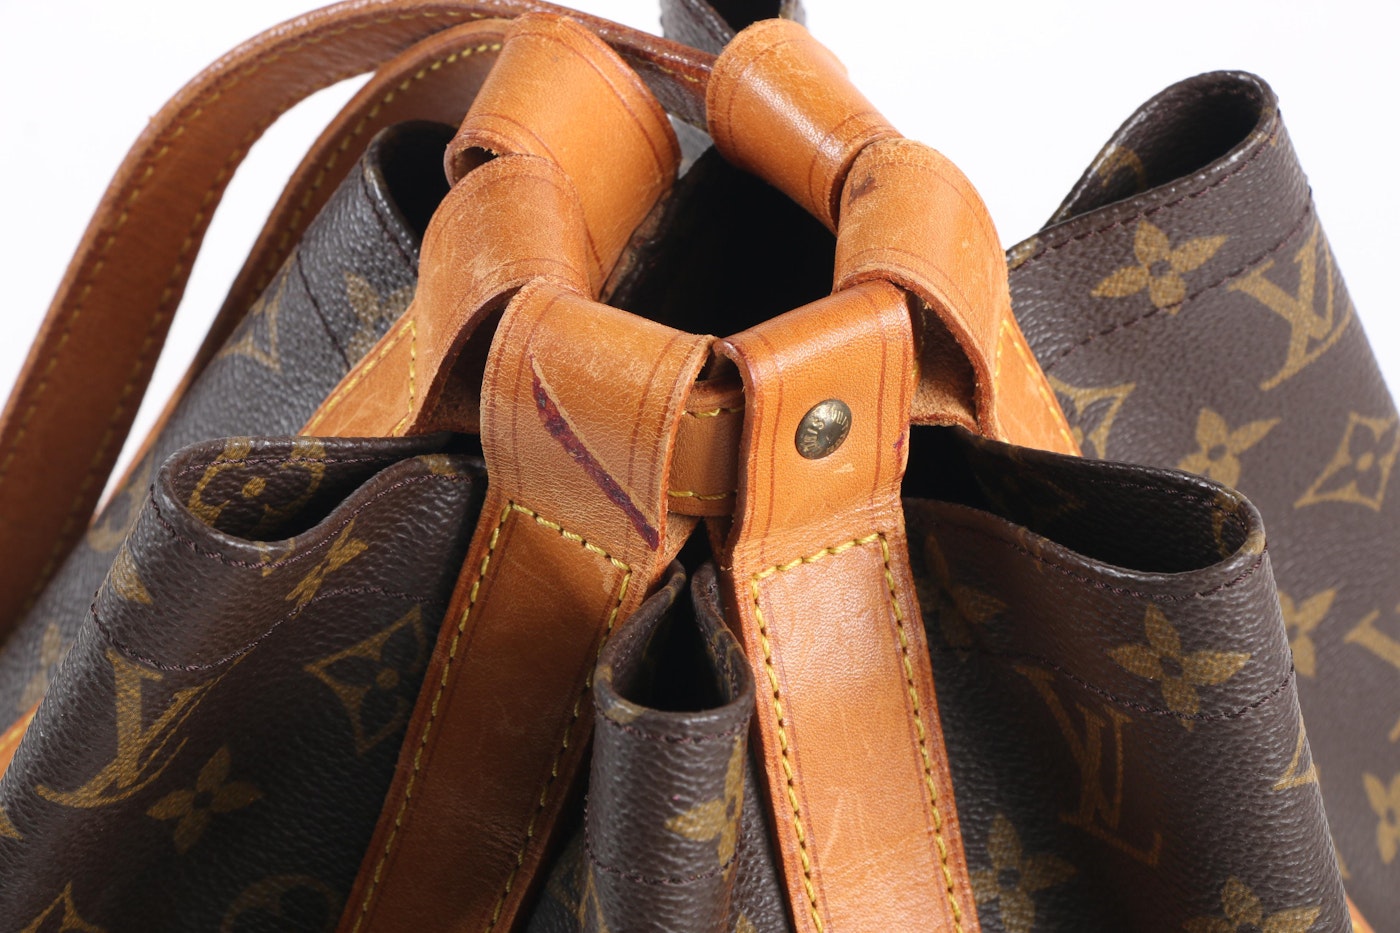 New Louis Vuitton Purses For Sales Tax